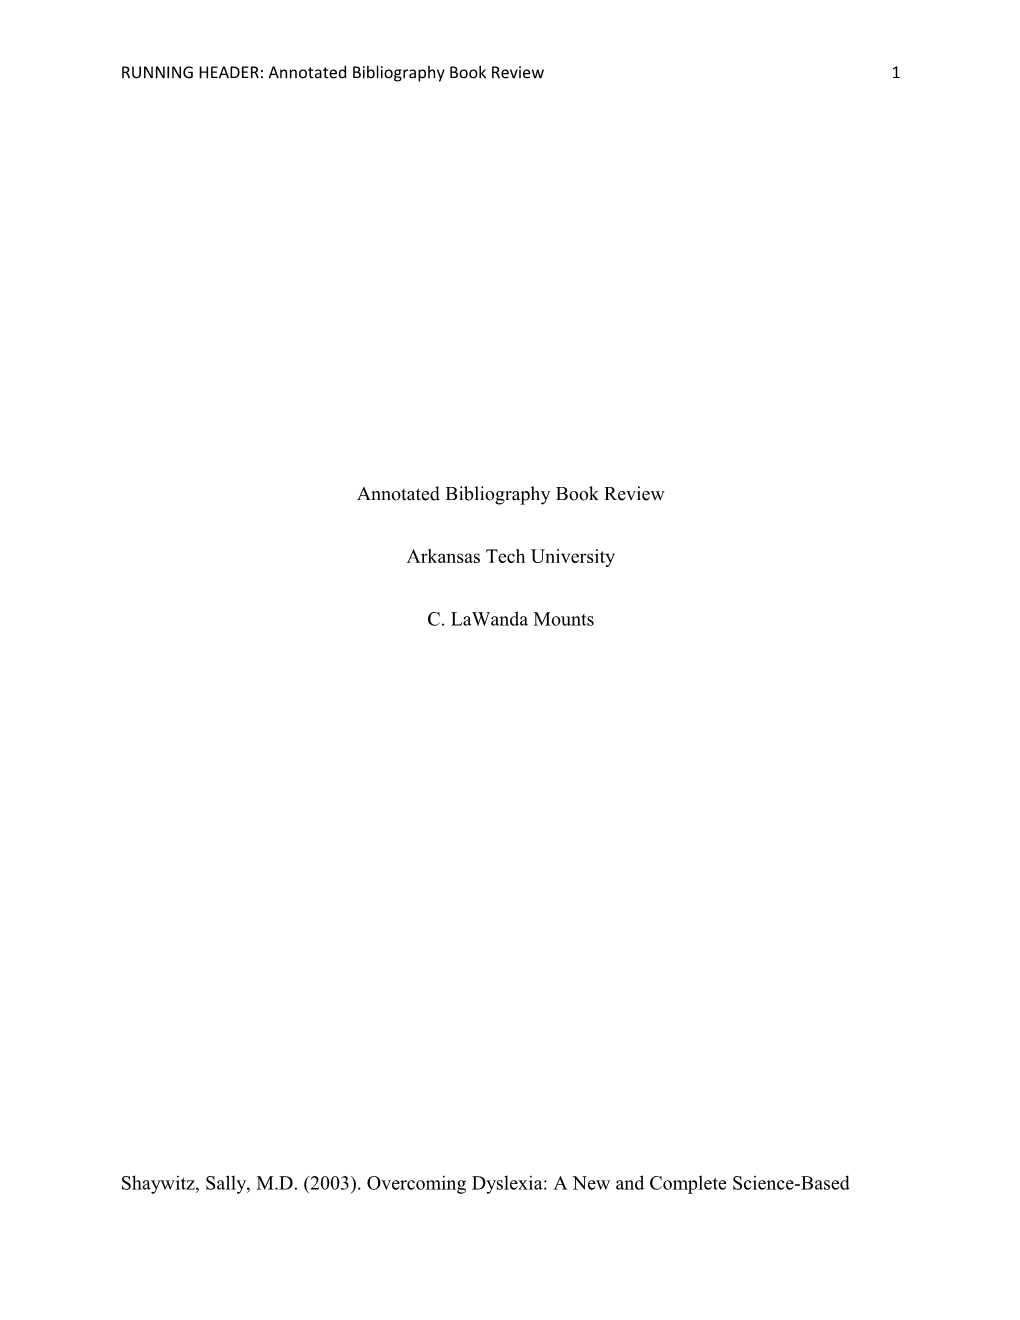 Annotated Bibliography Book Review